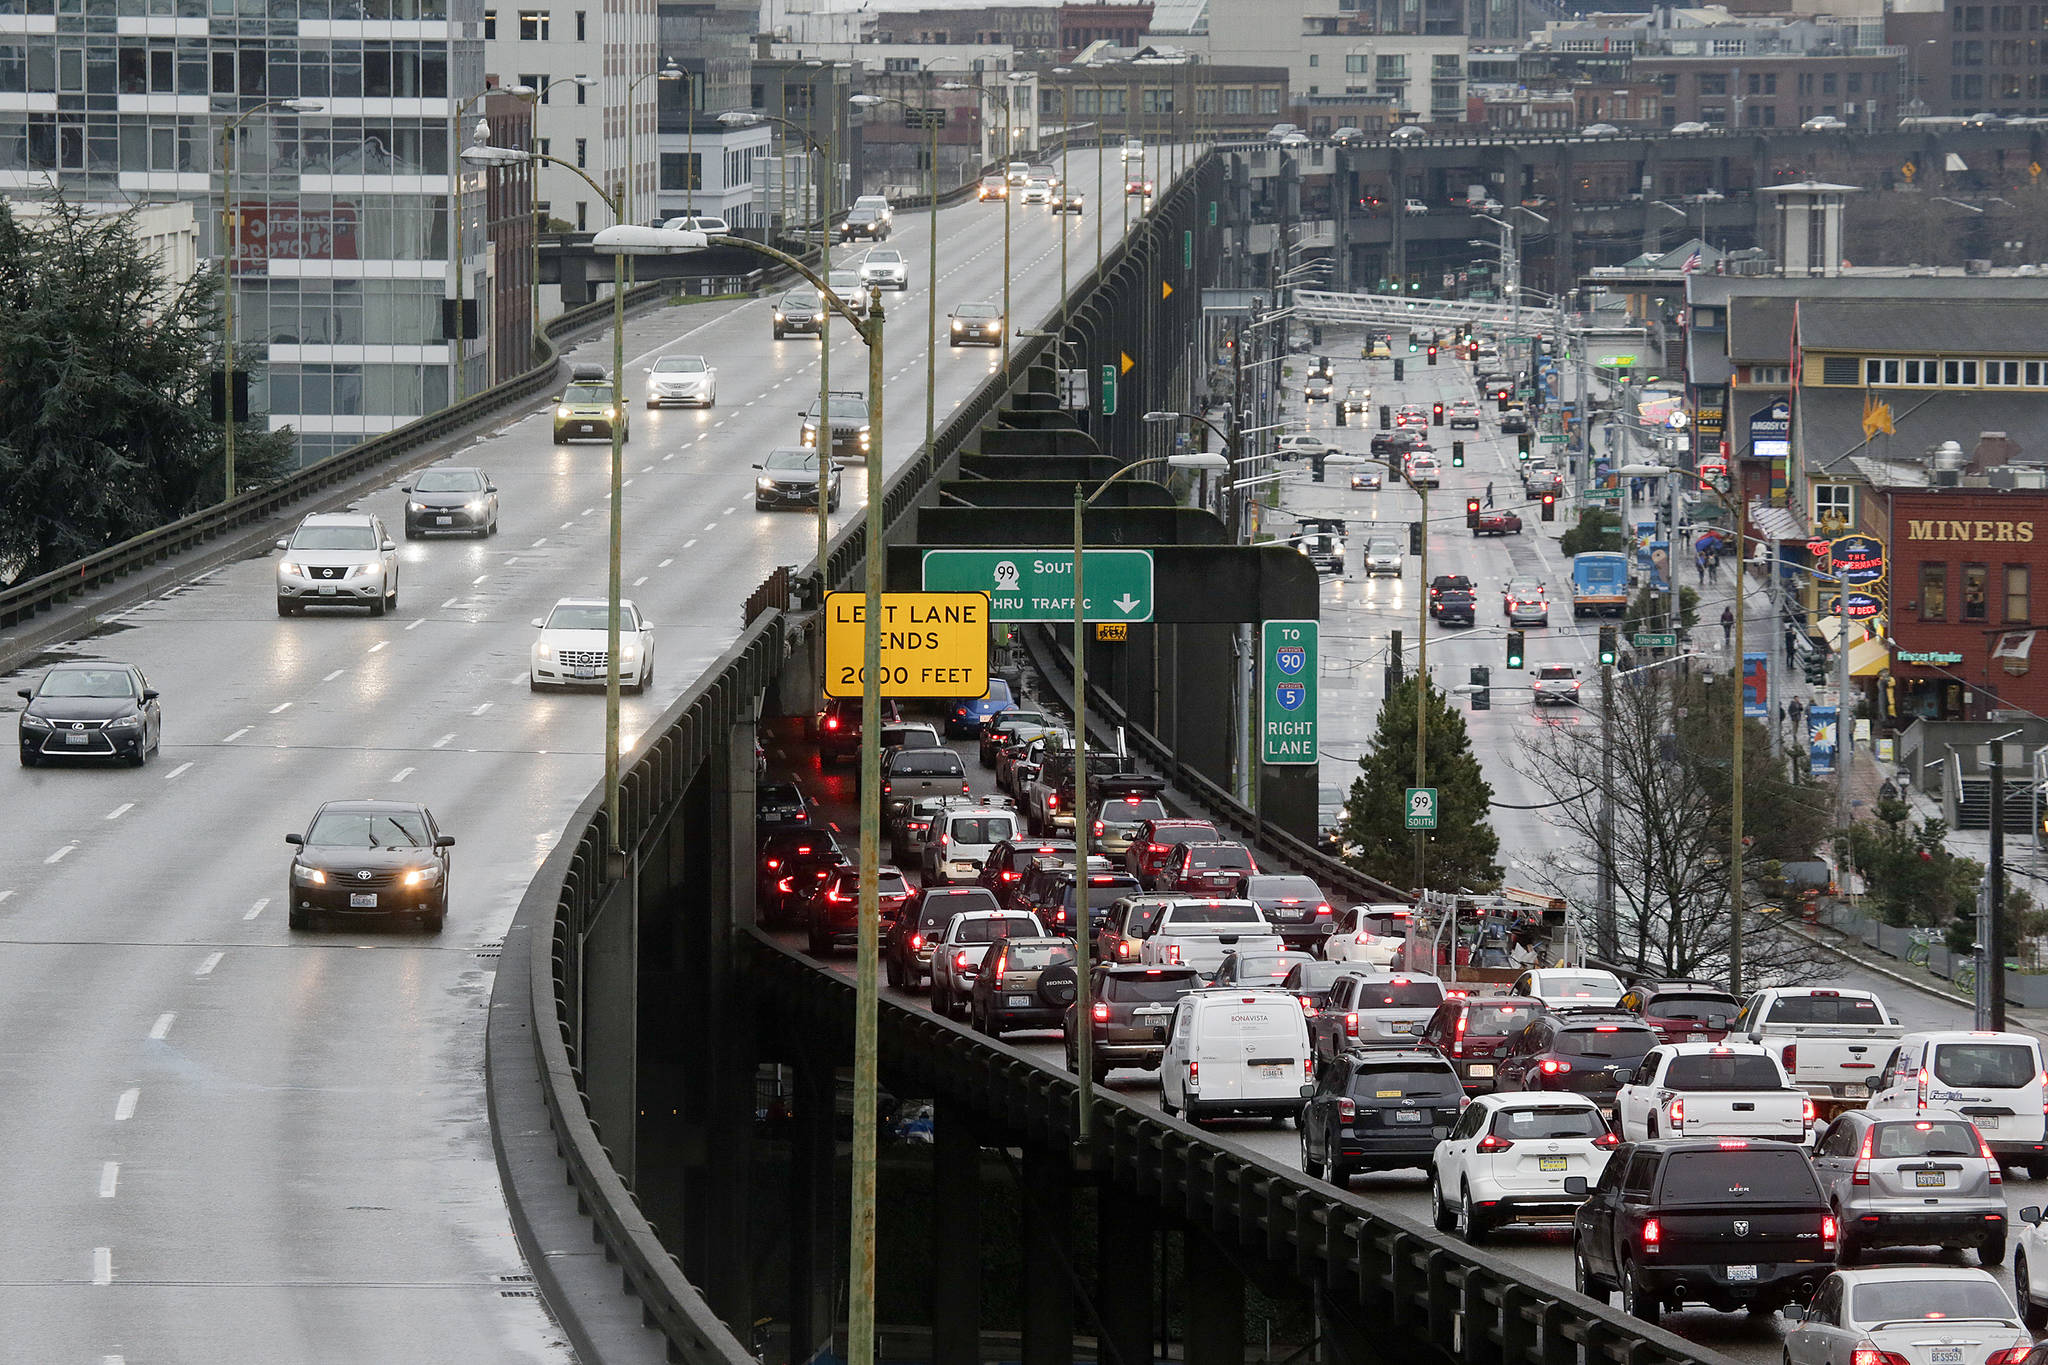 Southbound traffic backs up as northbound drivers cruise on with ease on the Highway 99 viaduct on Tuesday, Jan. 8, 2019. (Andy Bronson / The Herald)